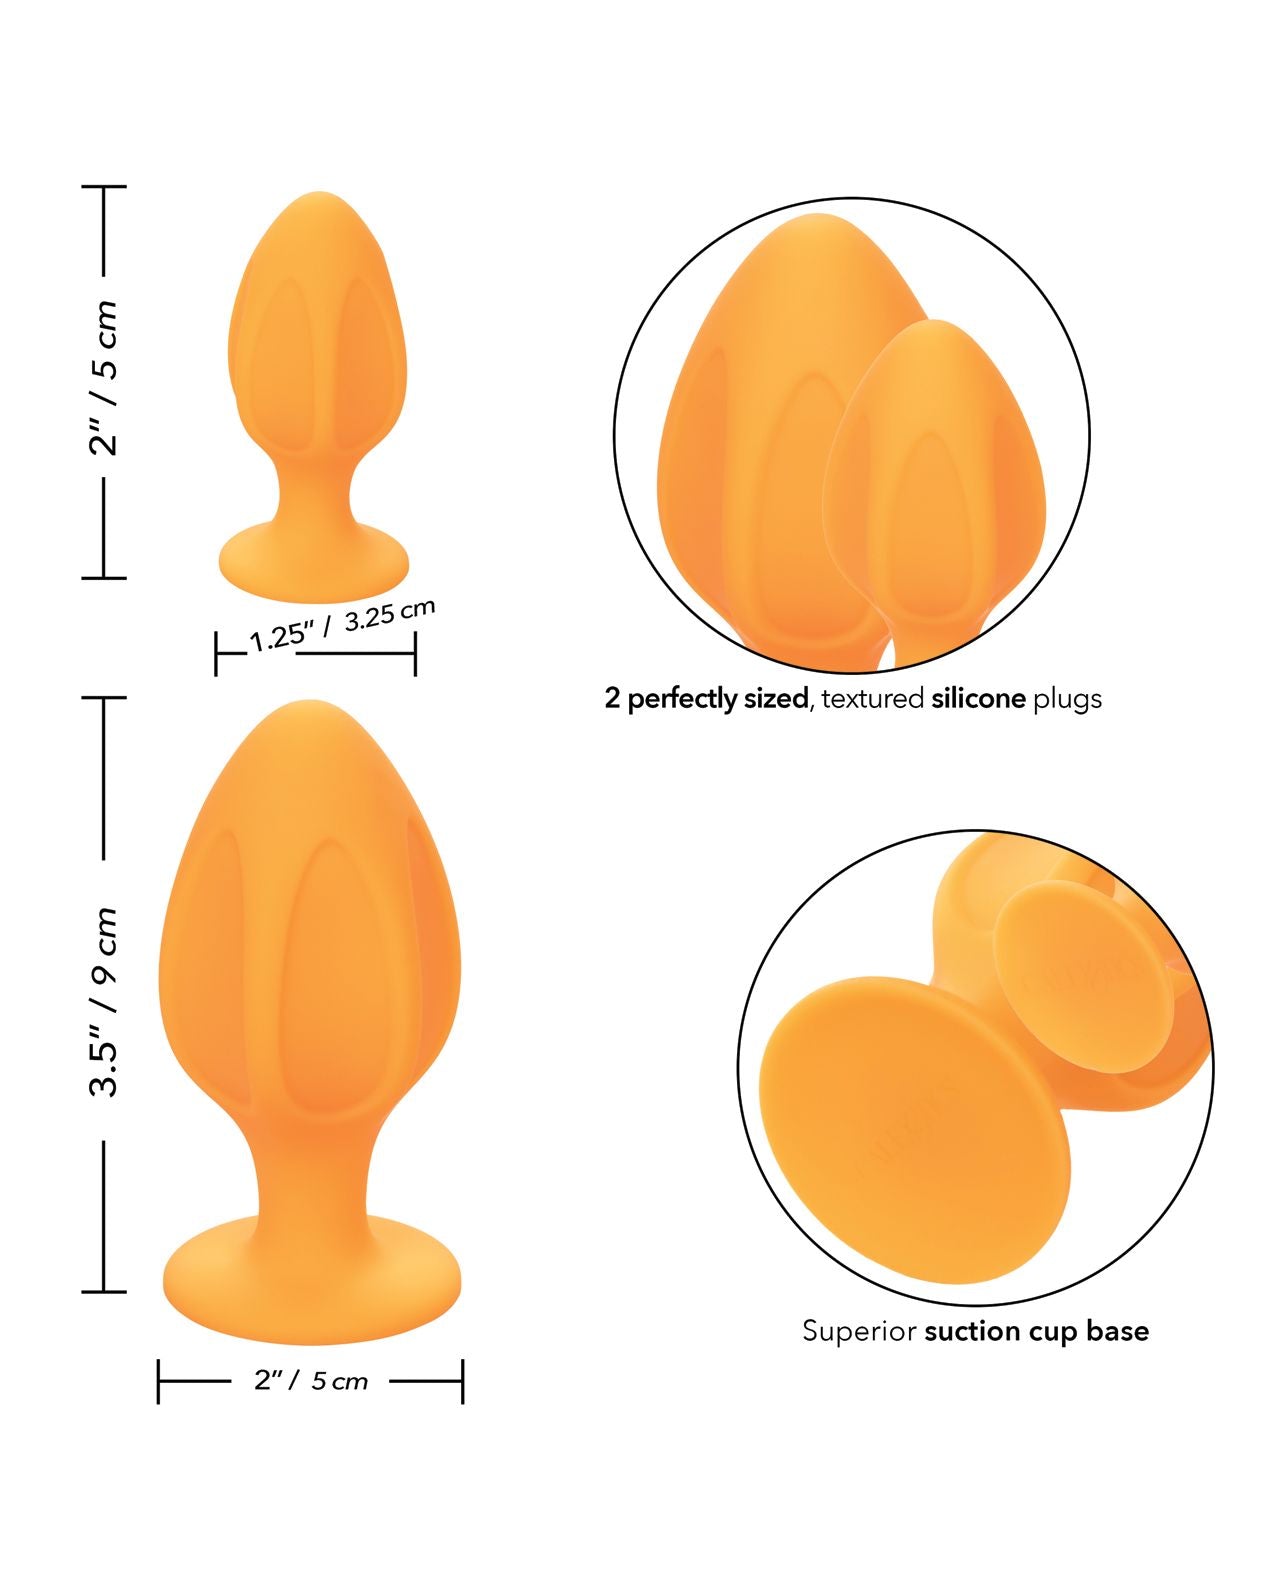 Image shows the dimensions of the 2 plugs, the narrow tips and suction cup base.